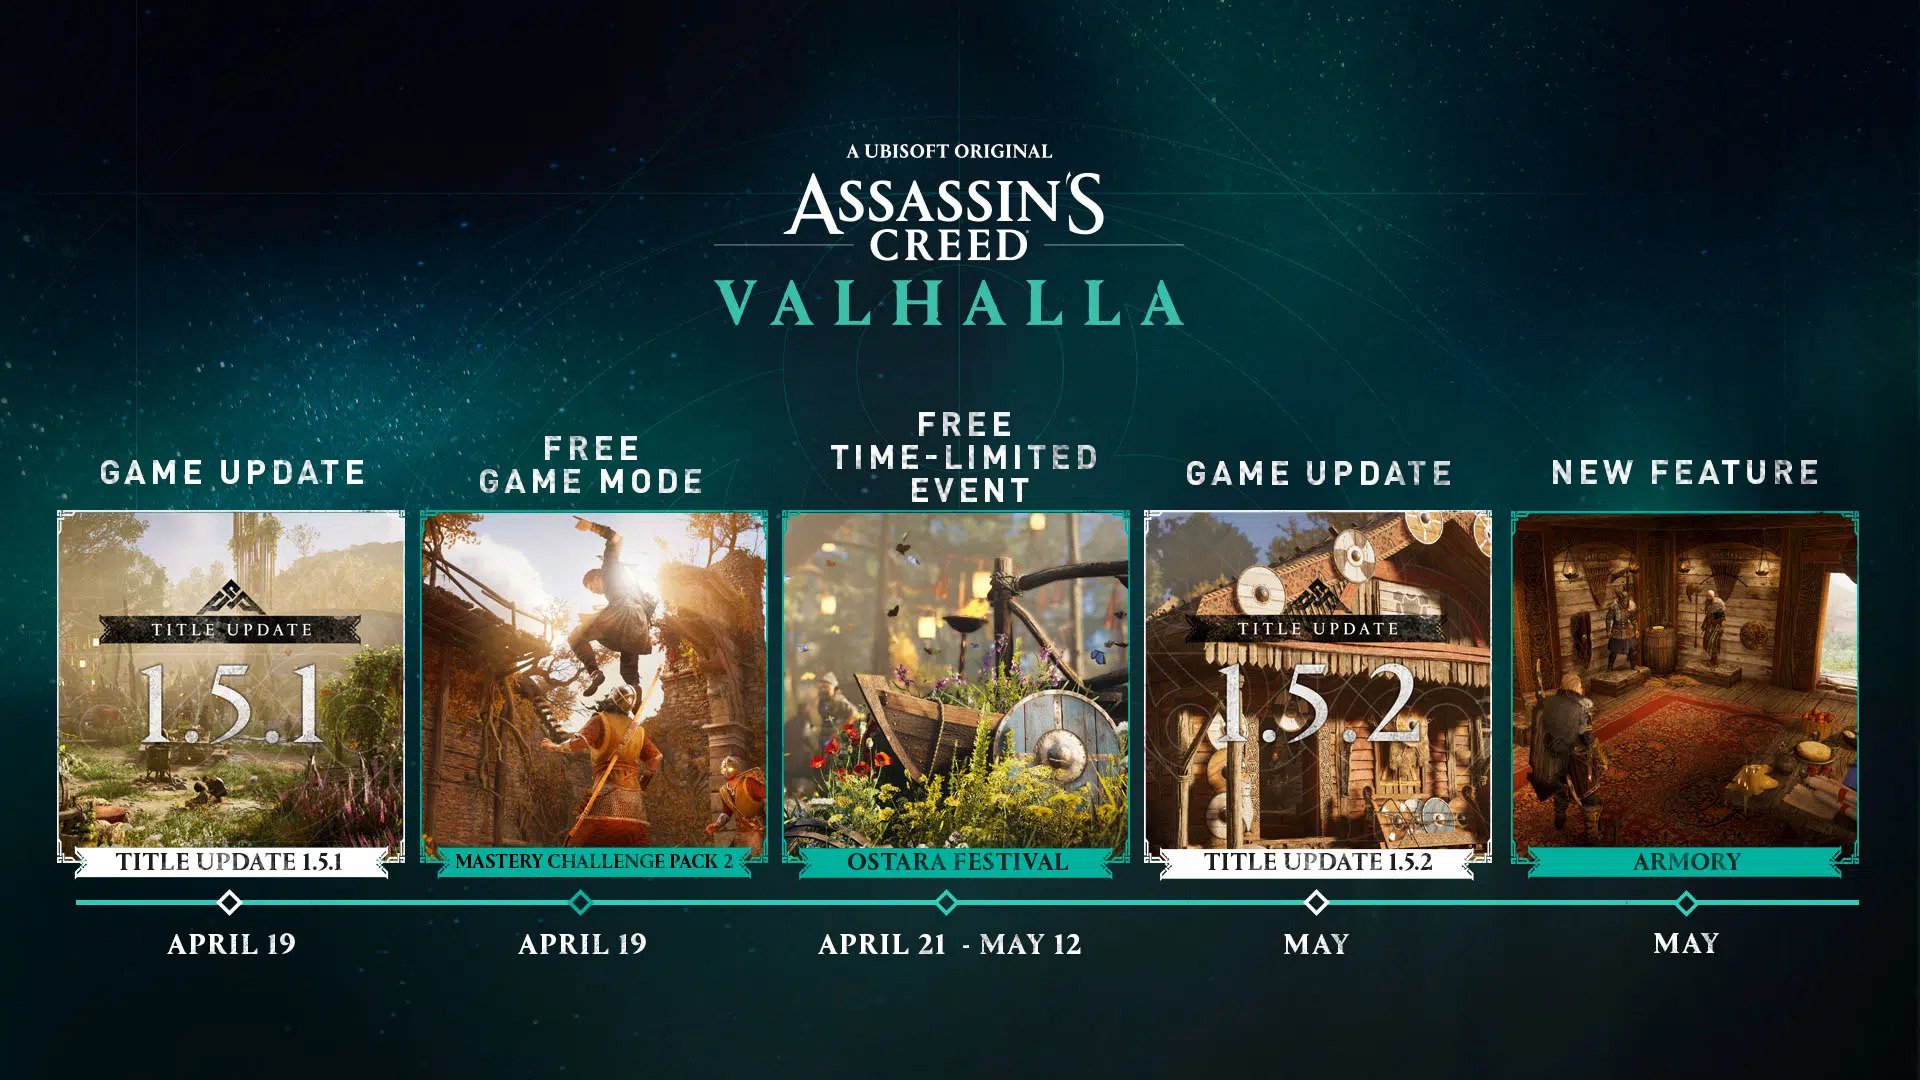 Assassin's Creed Valhalla – Title Update 1.1.2 : r/Games